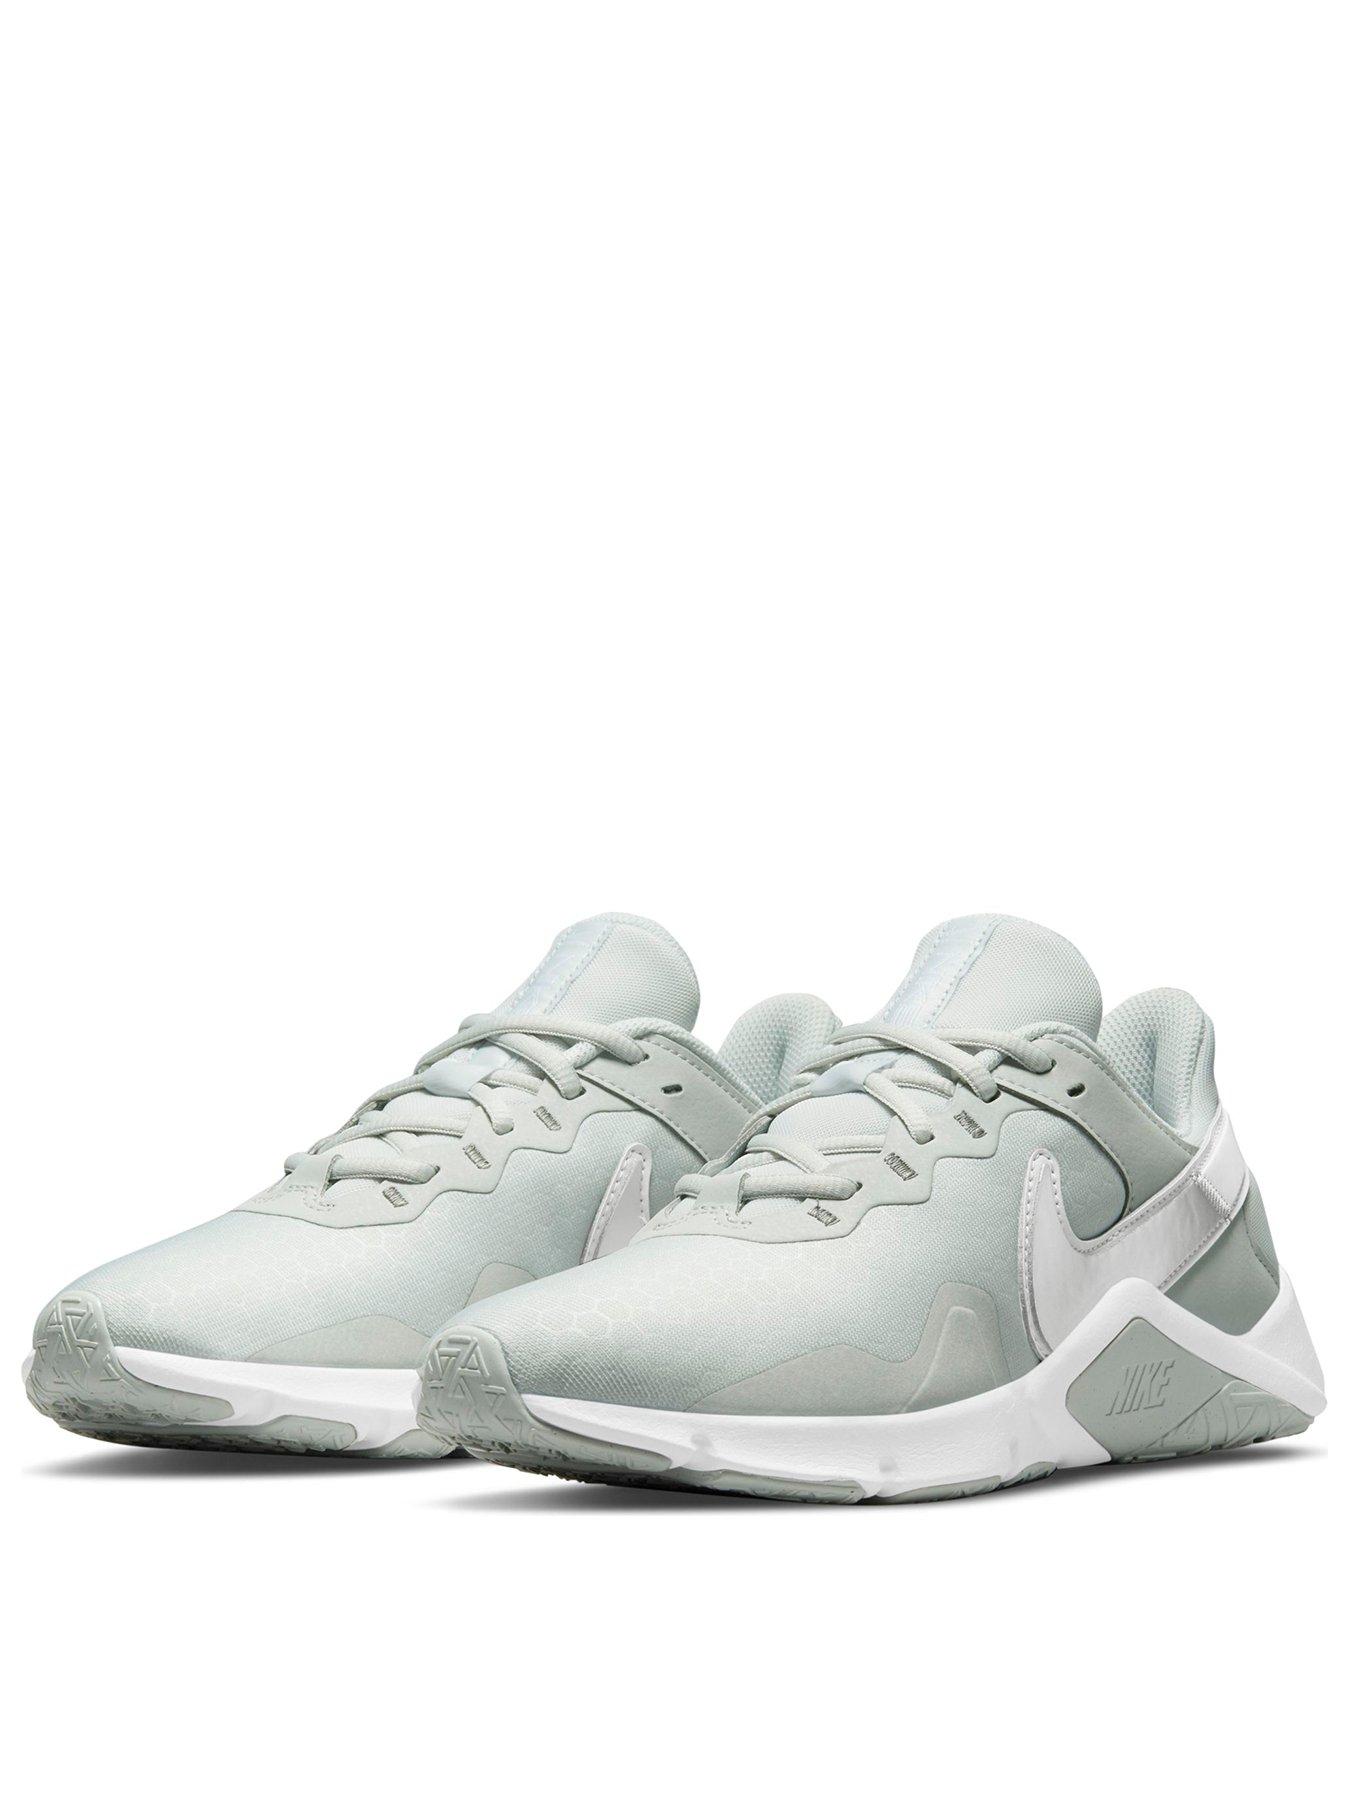 Trainers Legend - Grey/White